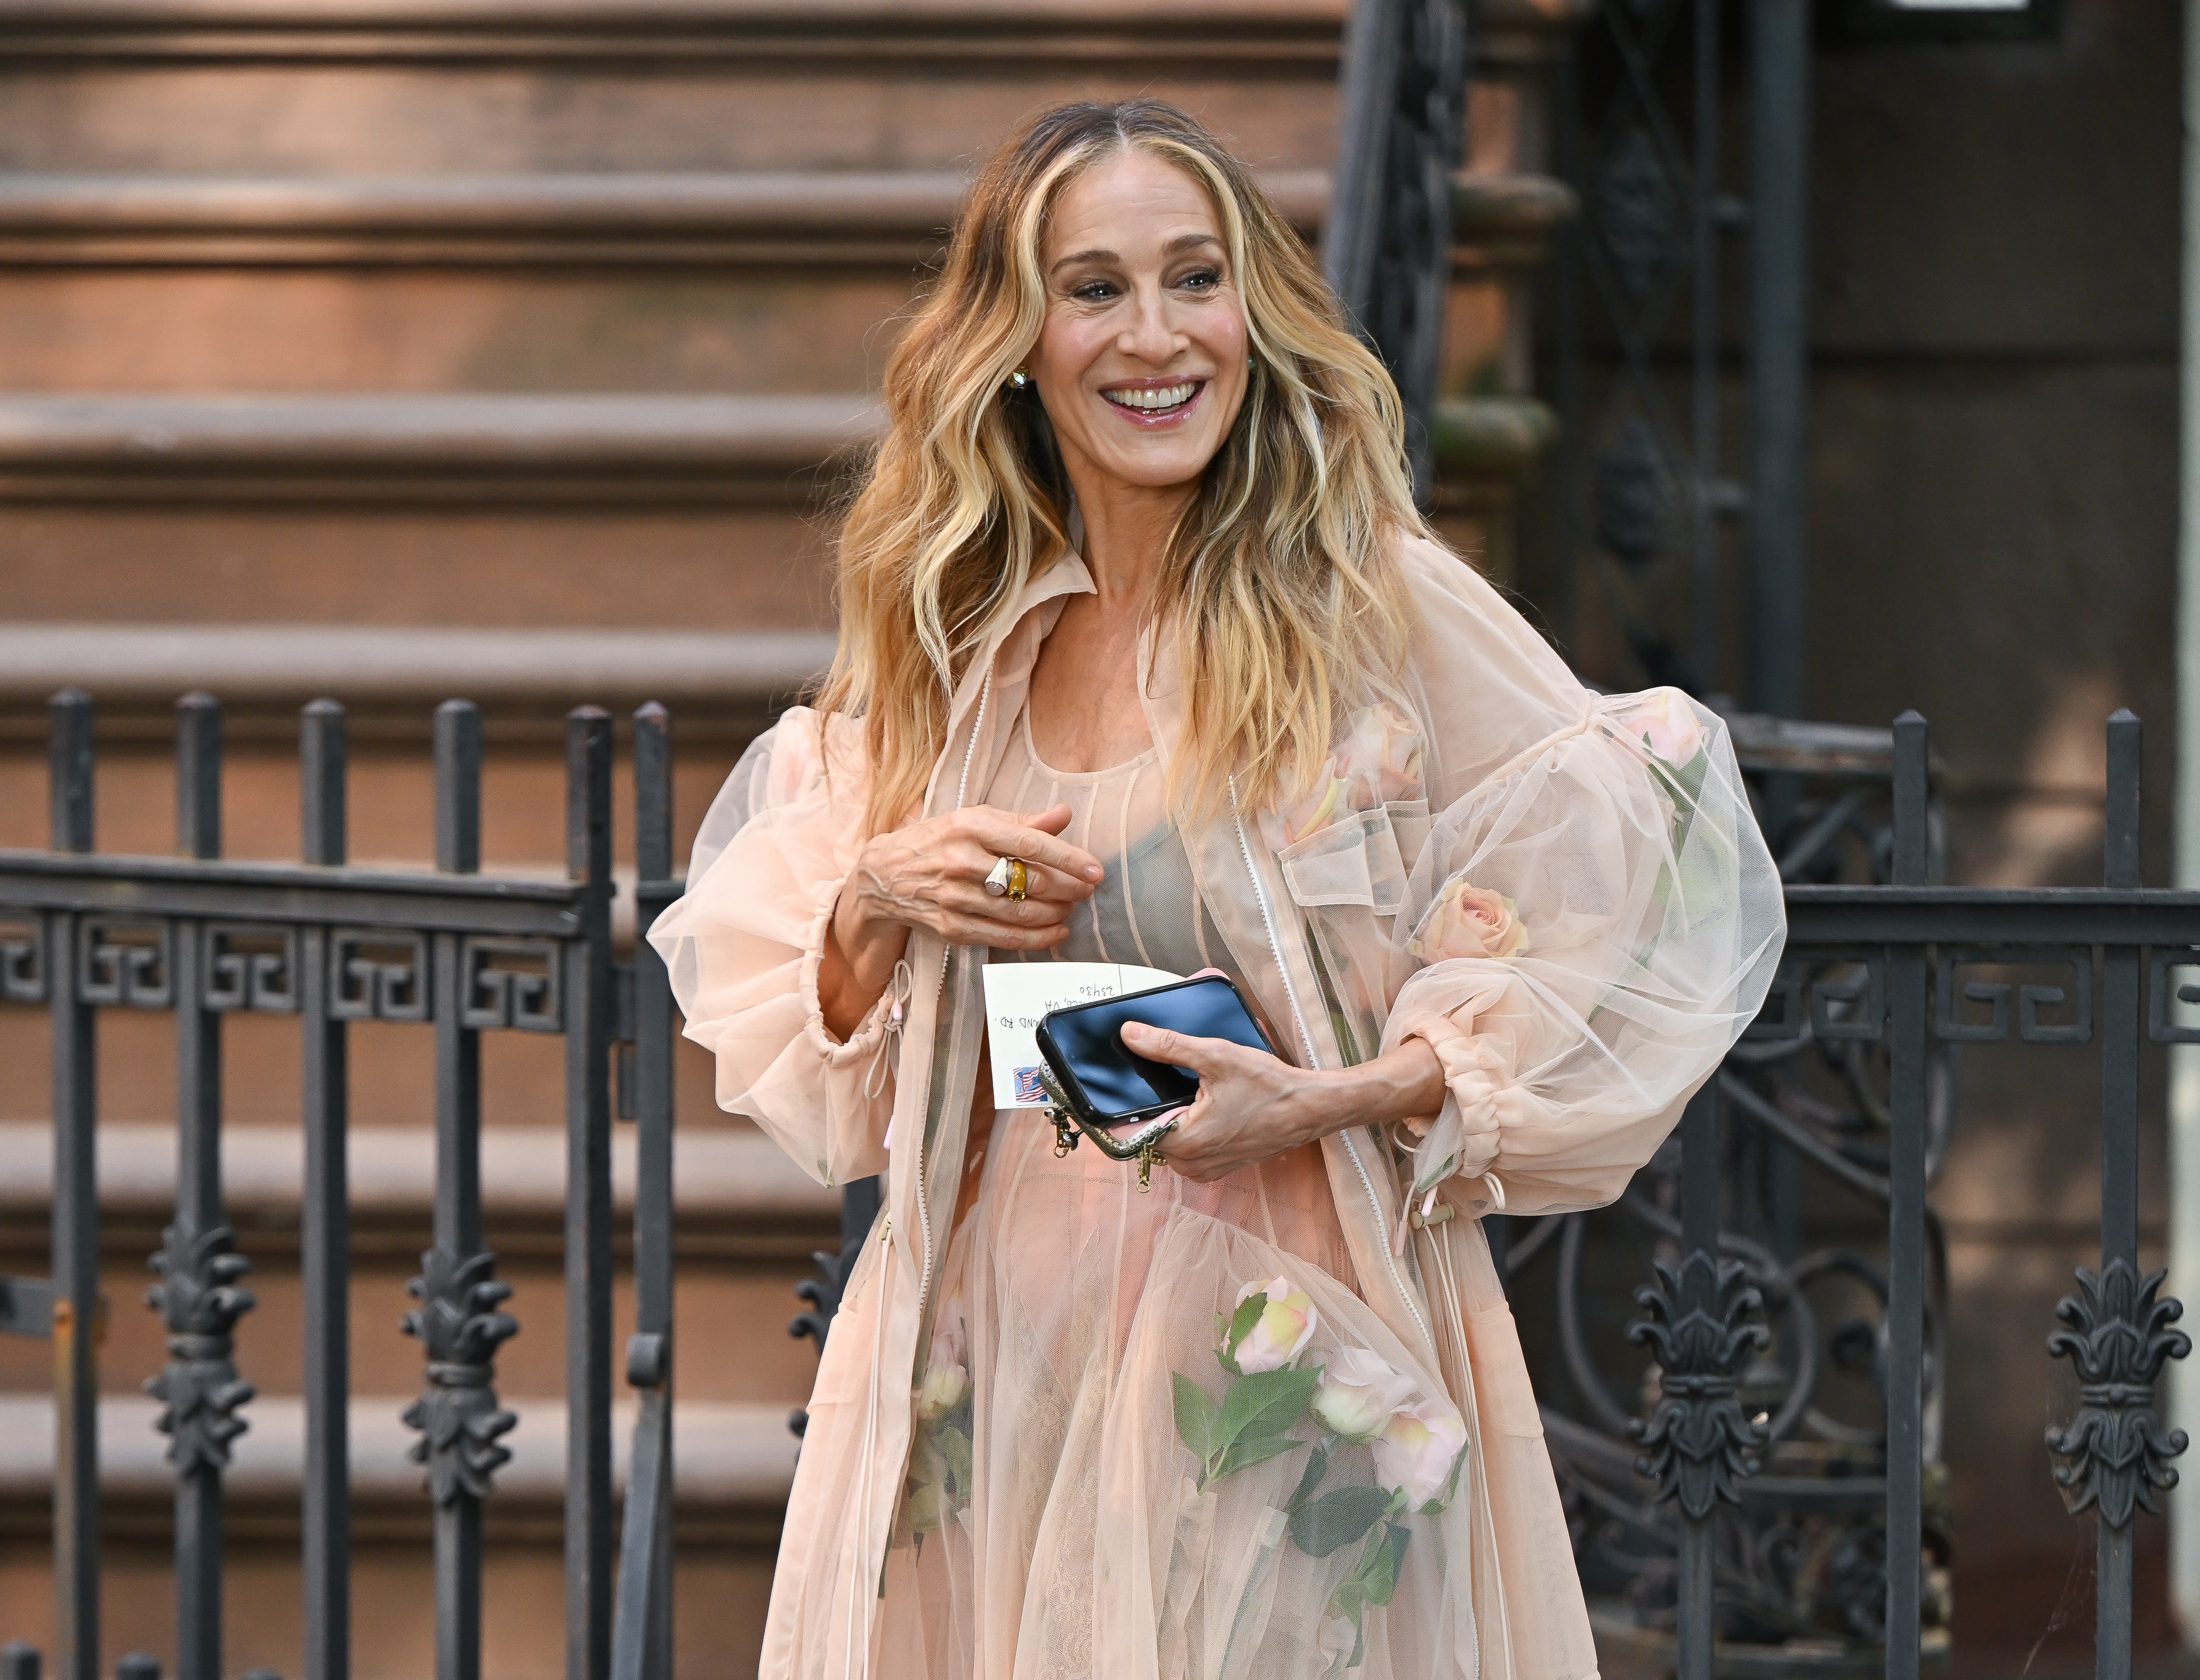 Sarah Jessica Parker Swaps Carrie’s Signature Stilettos for Dr. Scholl’s While Filming And Just Like That…